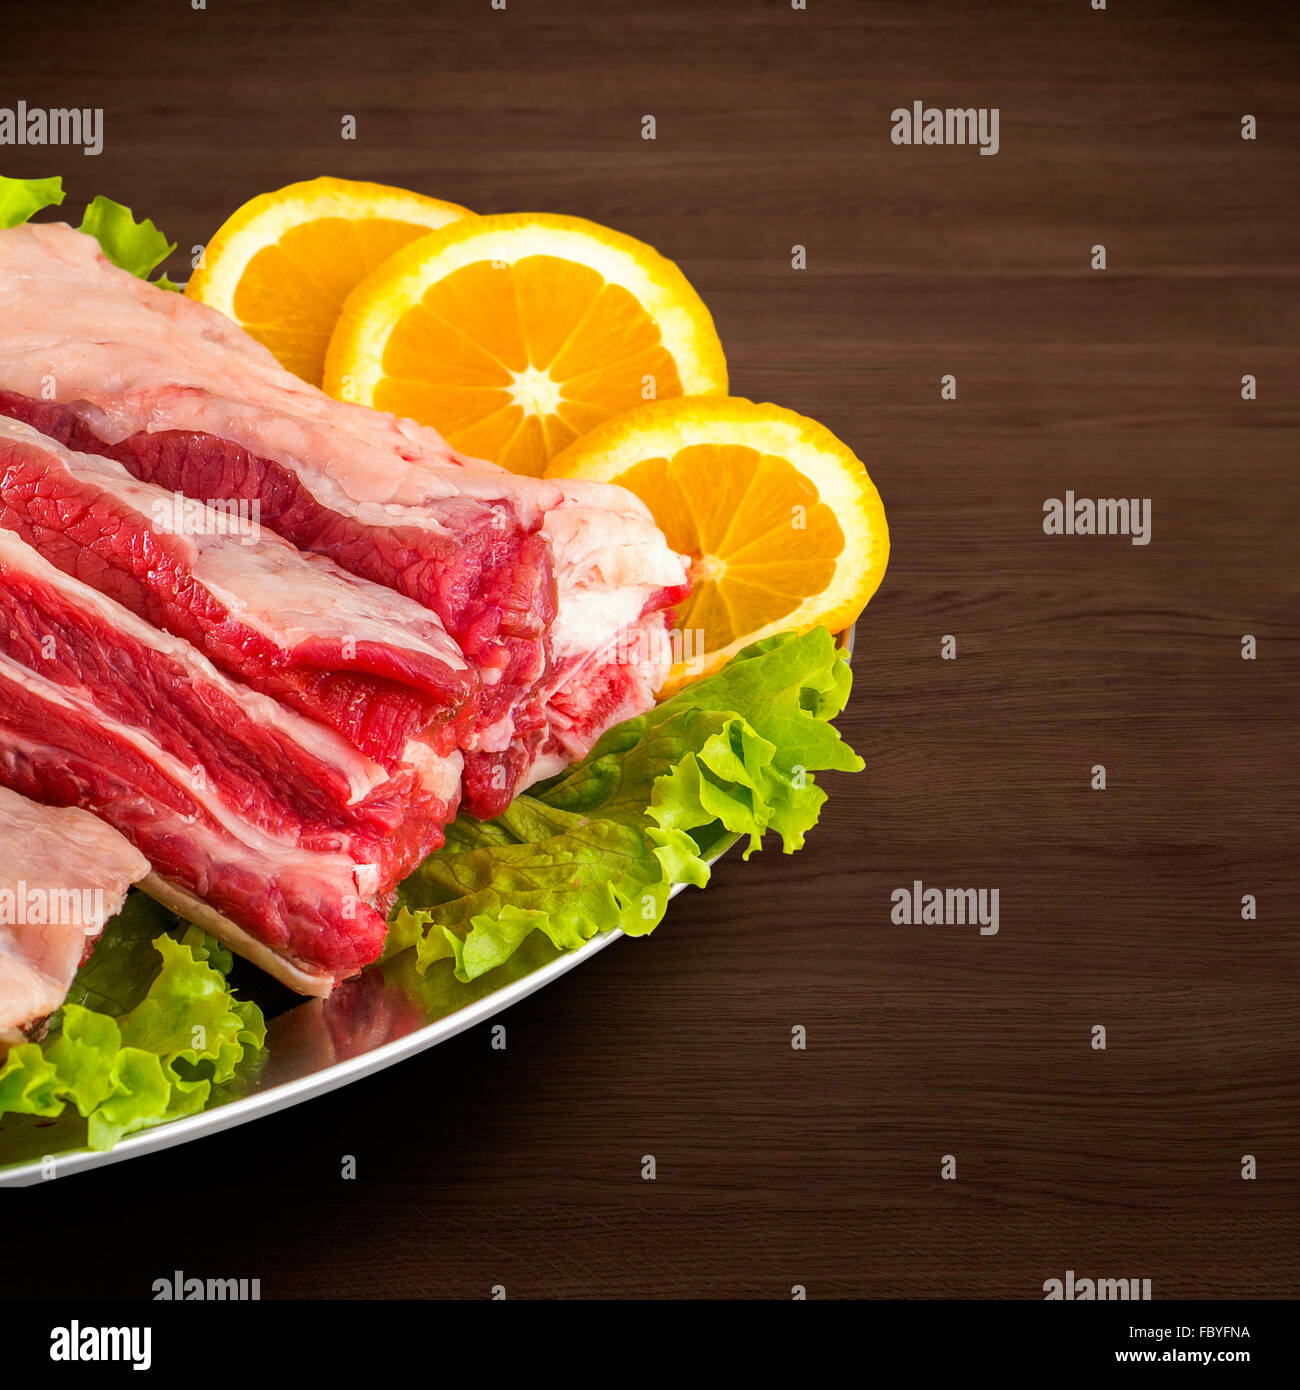 Fresh and raw meat. Ribs and pork chops uncooked, uncut ready to grill and barbecue with clipping path Stock Photo